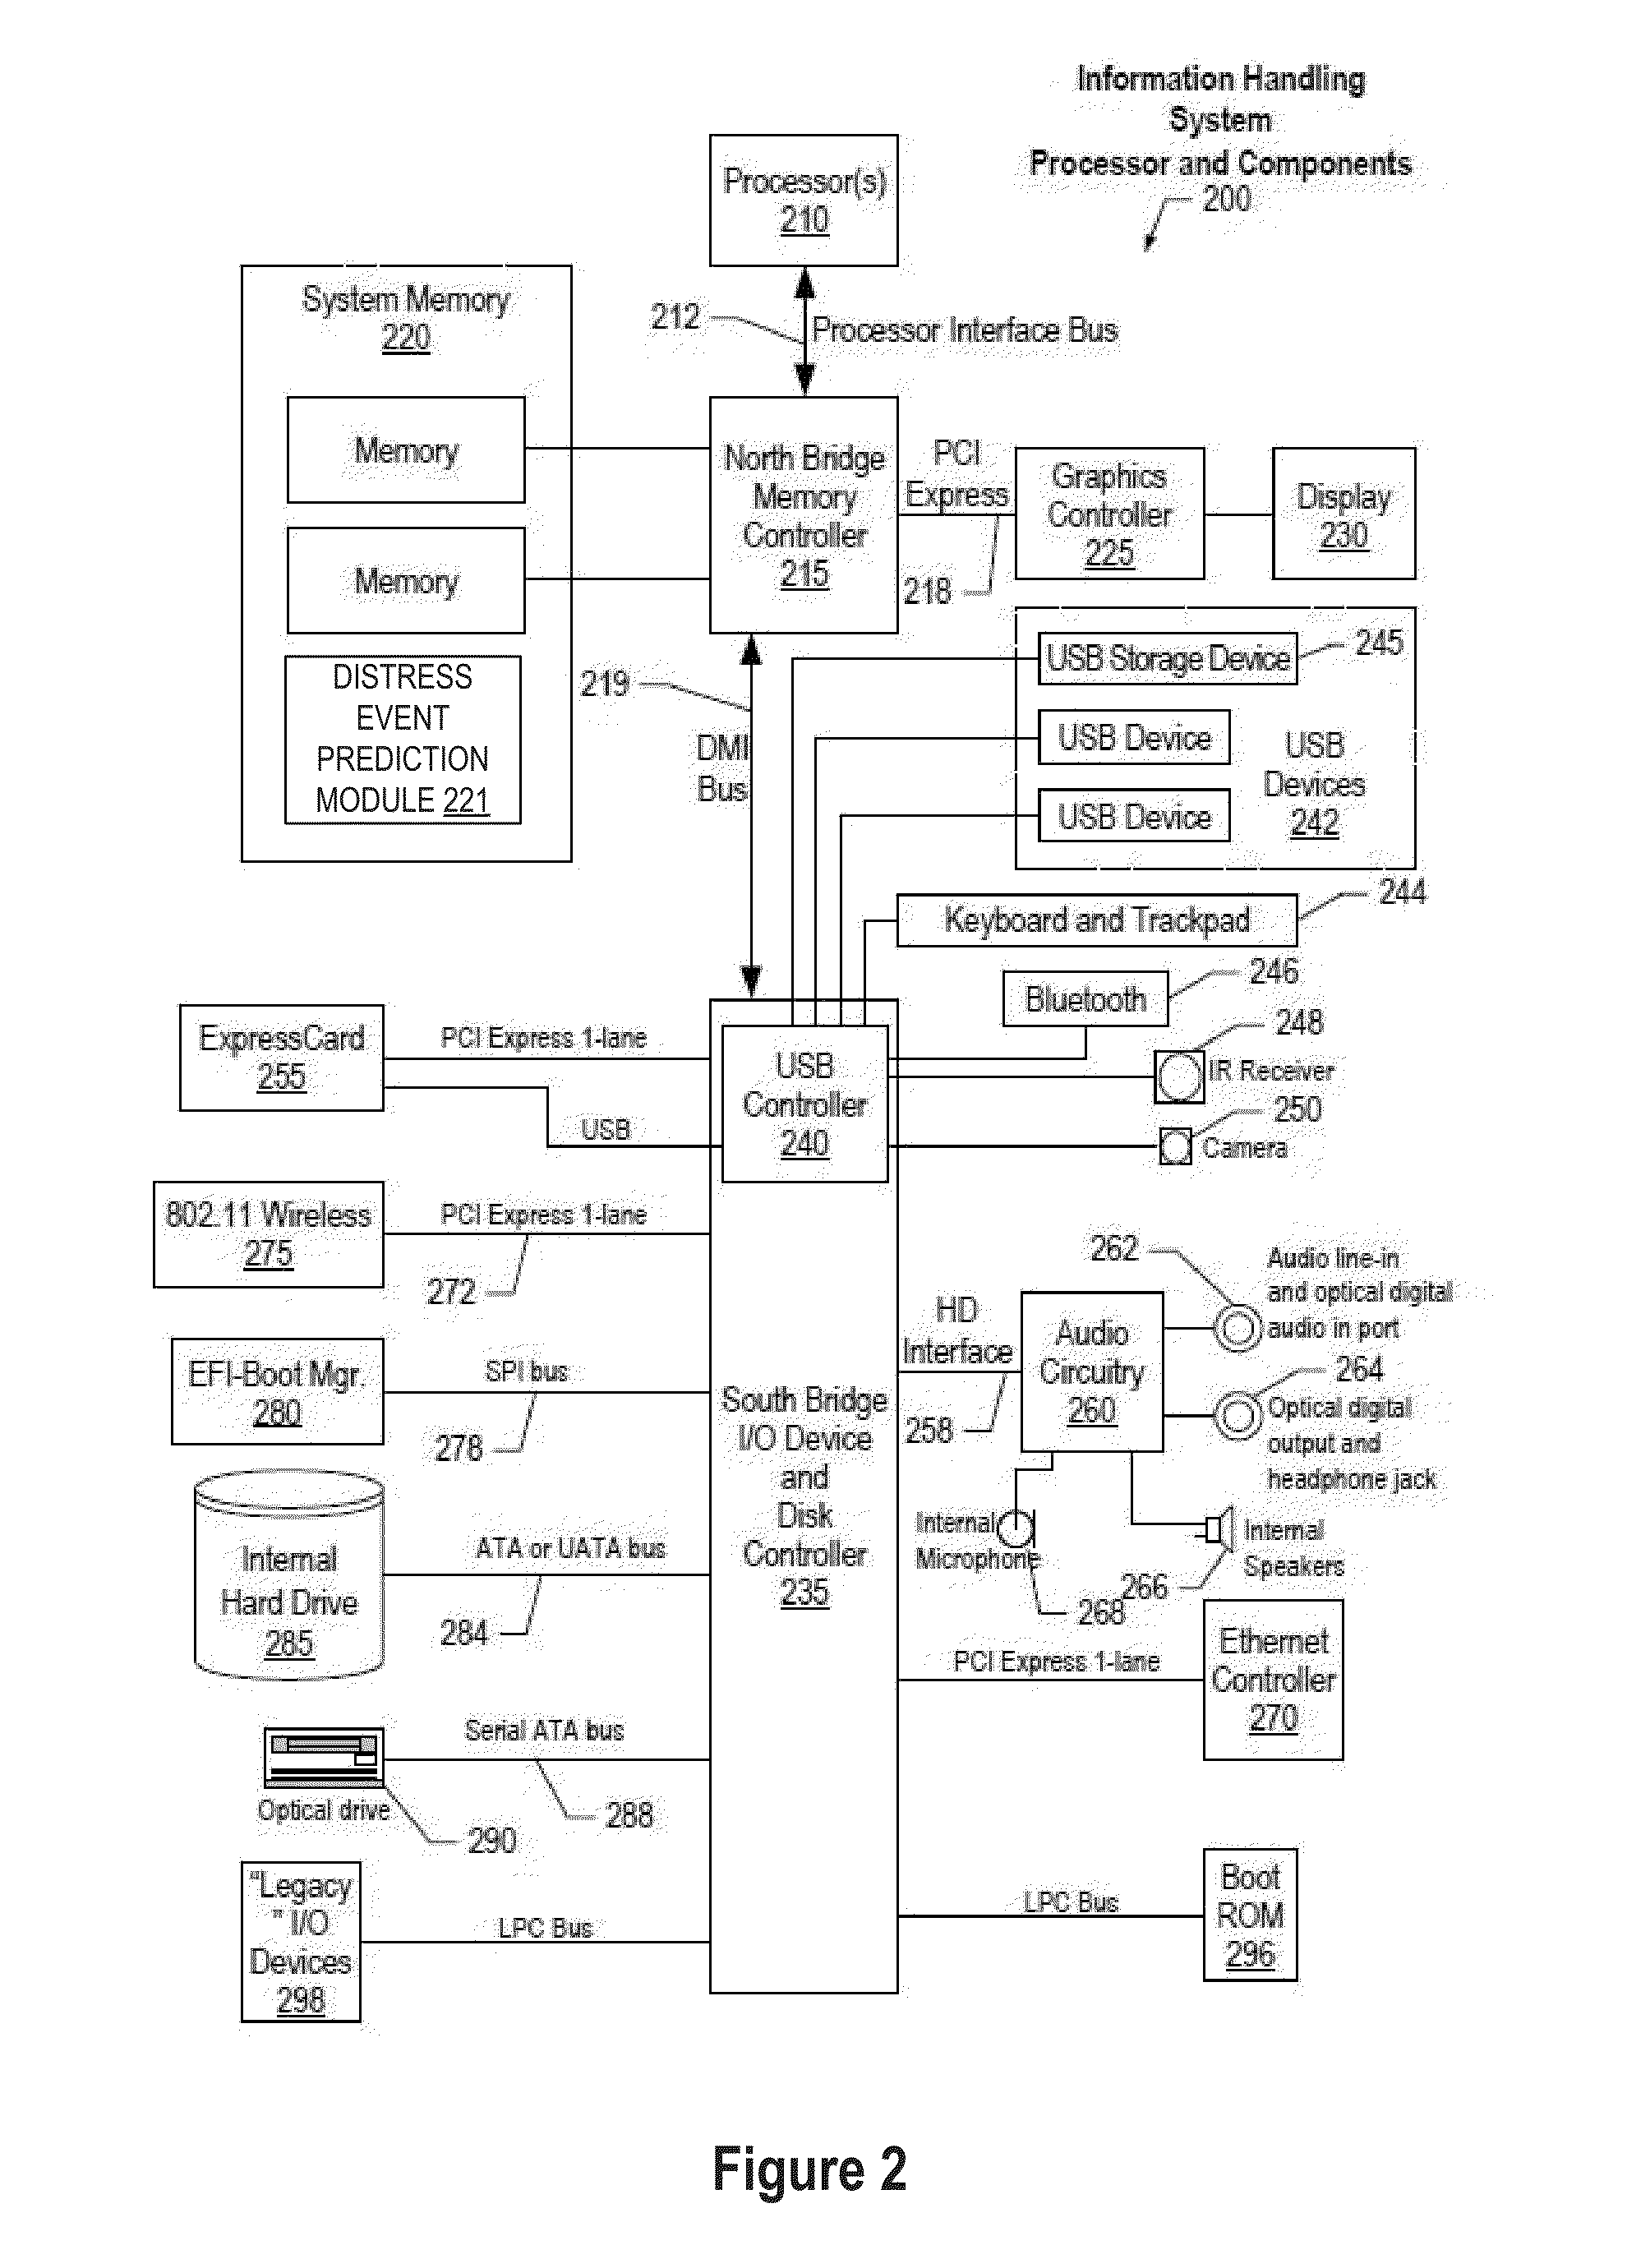 Method for Automatic Near-Real-Time Prediction, Classification, and Notification of Events in Natural Language Systems